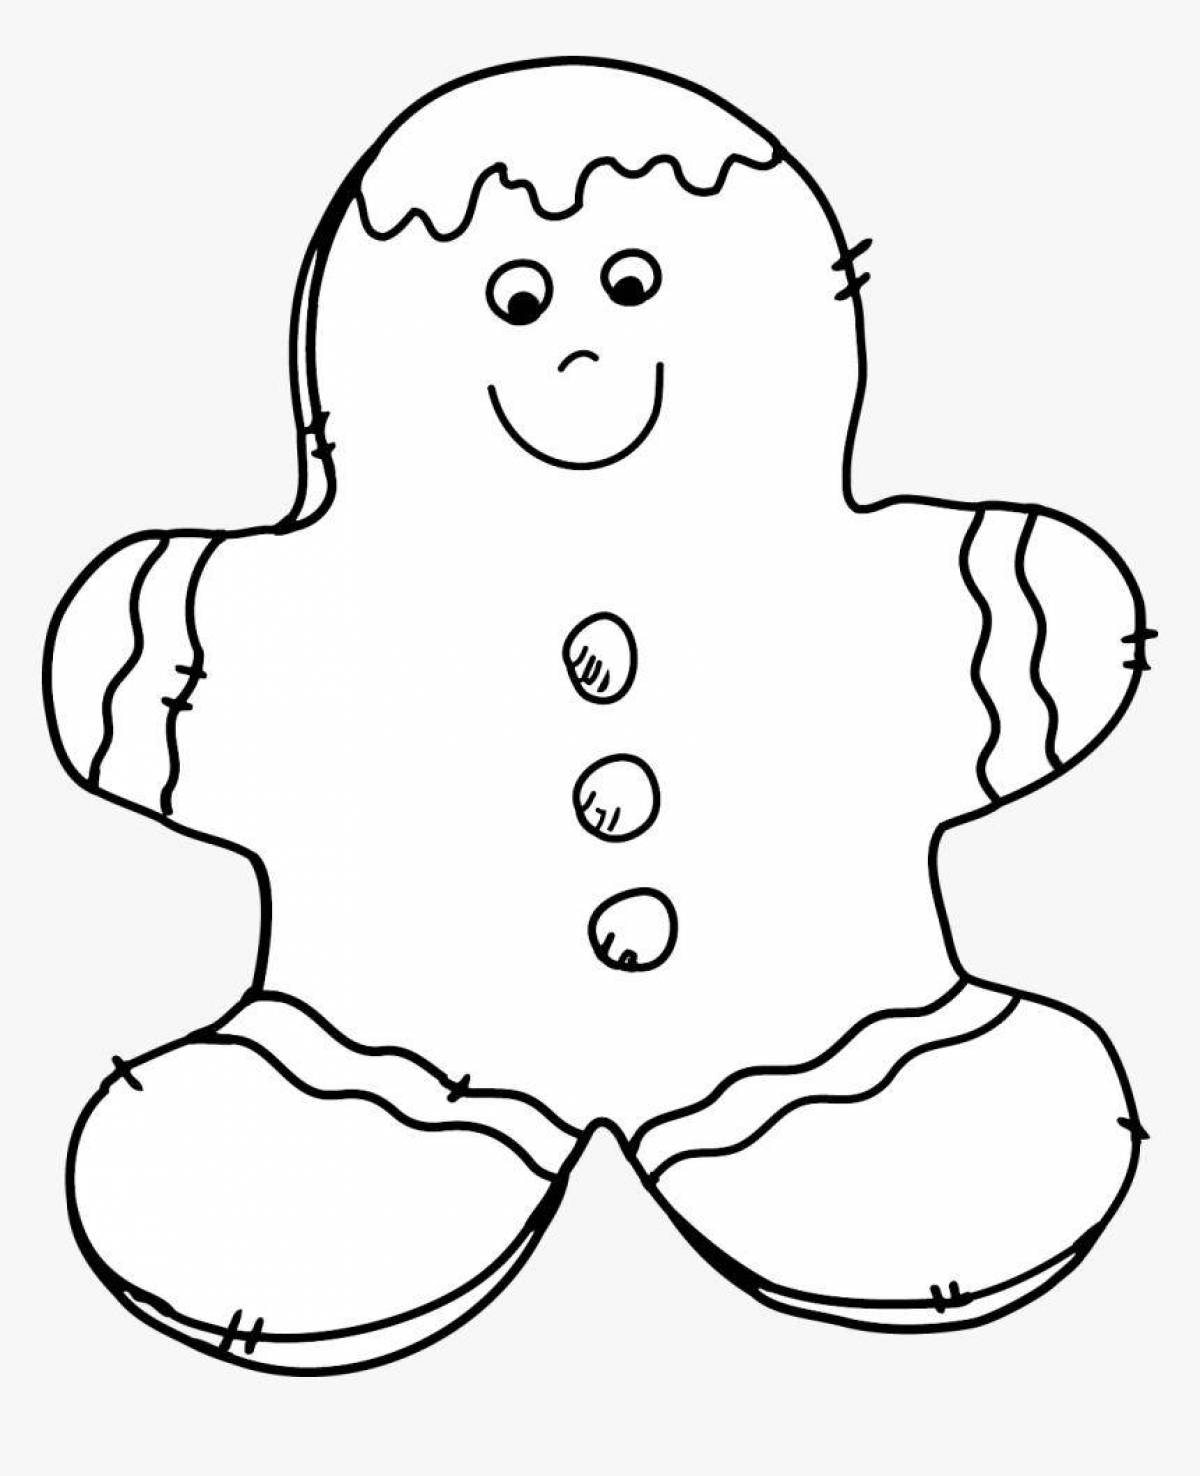 Coloring page adorable Christmas cookies